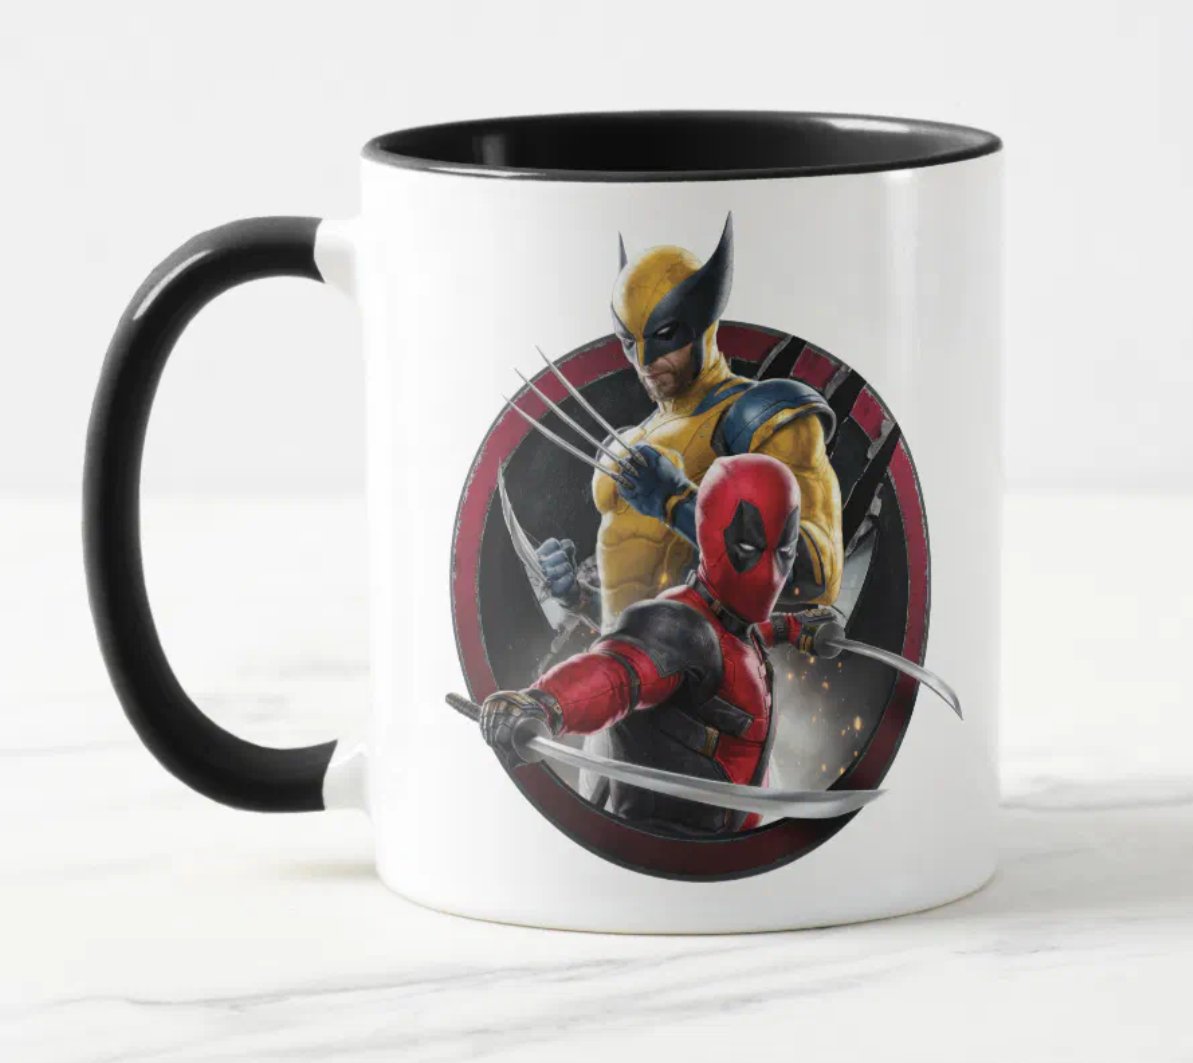 Psst, Marvel. Zazzle. We love all the merch! And we understand not wanting to see Deadpool's face, but how about something that shows Wolverine withOUT the mask. #hughjackman #wolverine zazzle.com/store/deadpool…